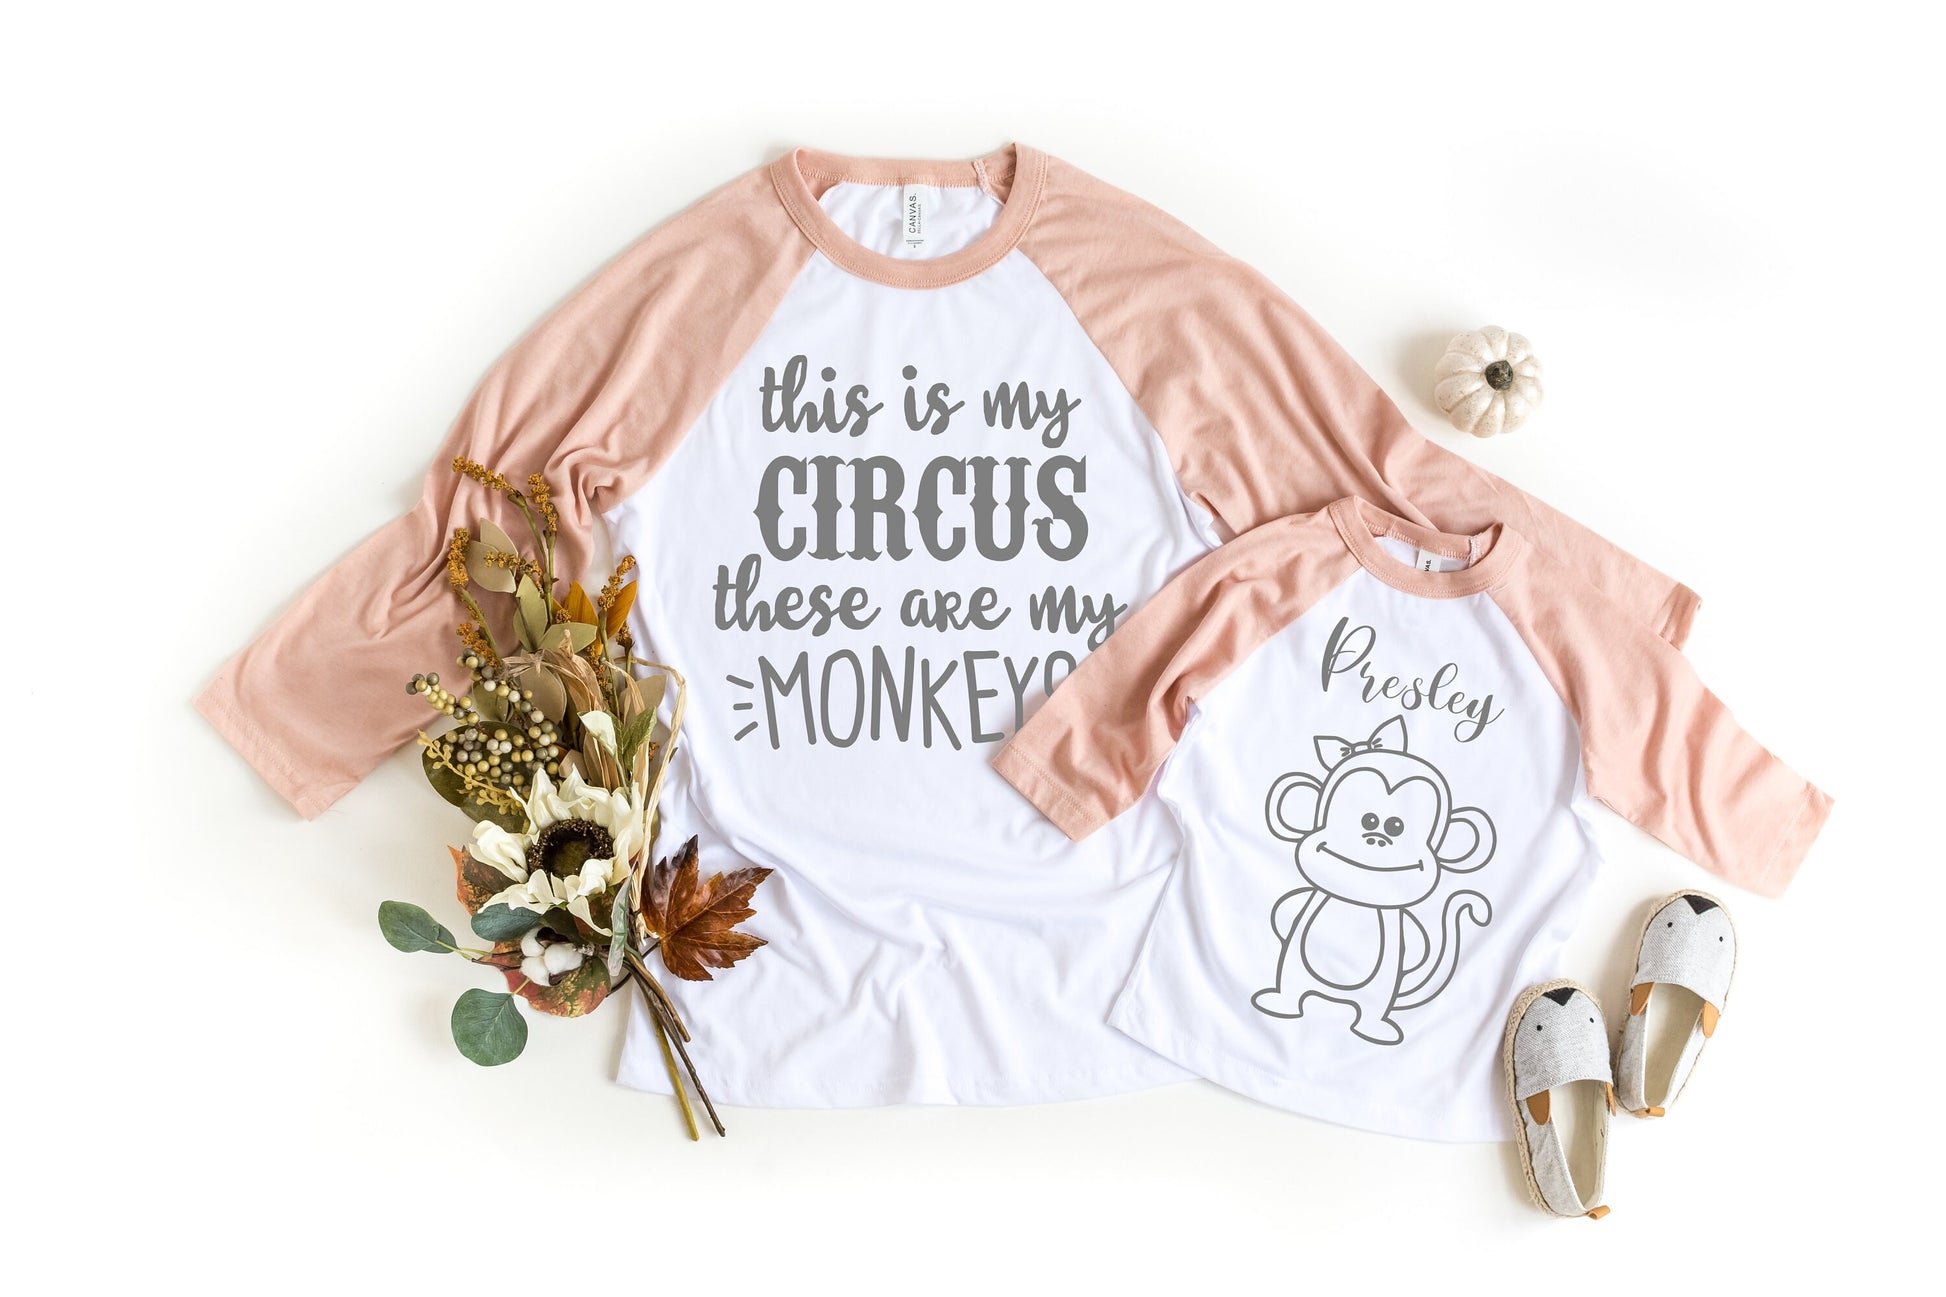 This Is My Circus and These are My Monkeys raglan t-shirt - Mom of Twins - Mom of Triplets - Mom of Multiples - Funny Mom Shirt - Mom Gift